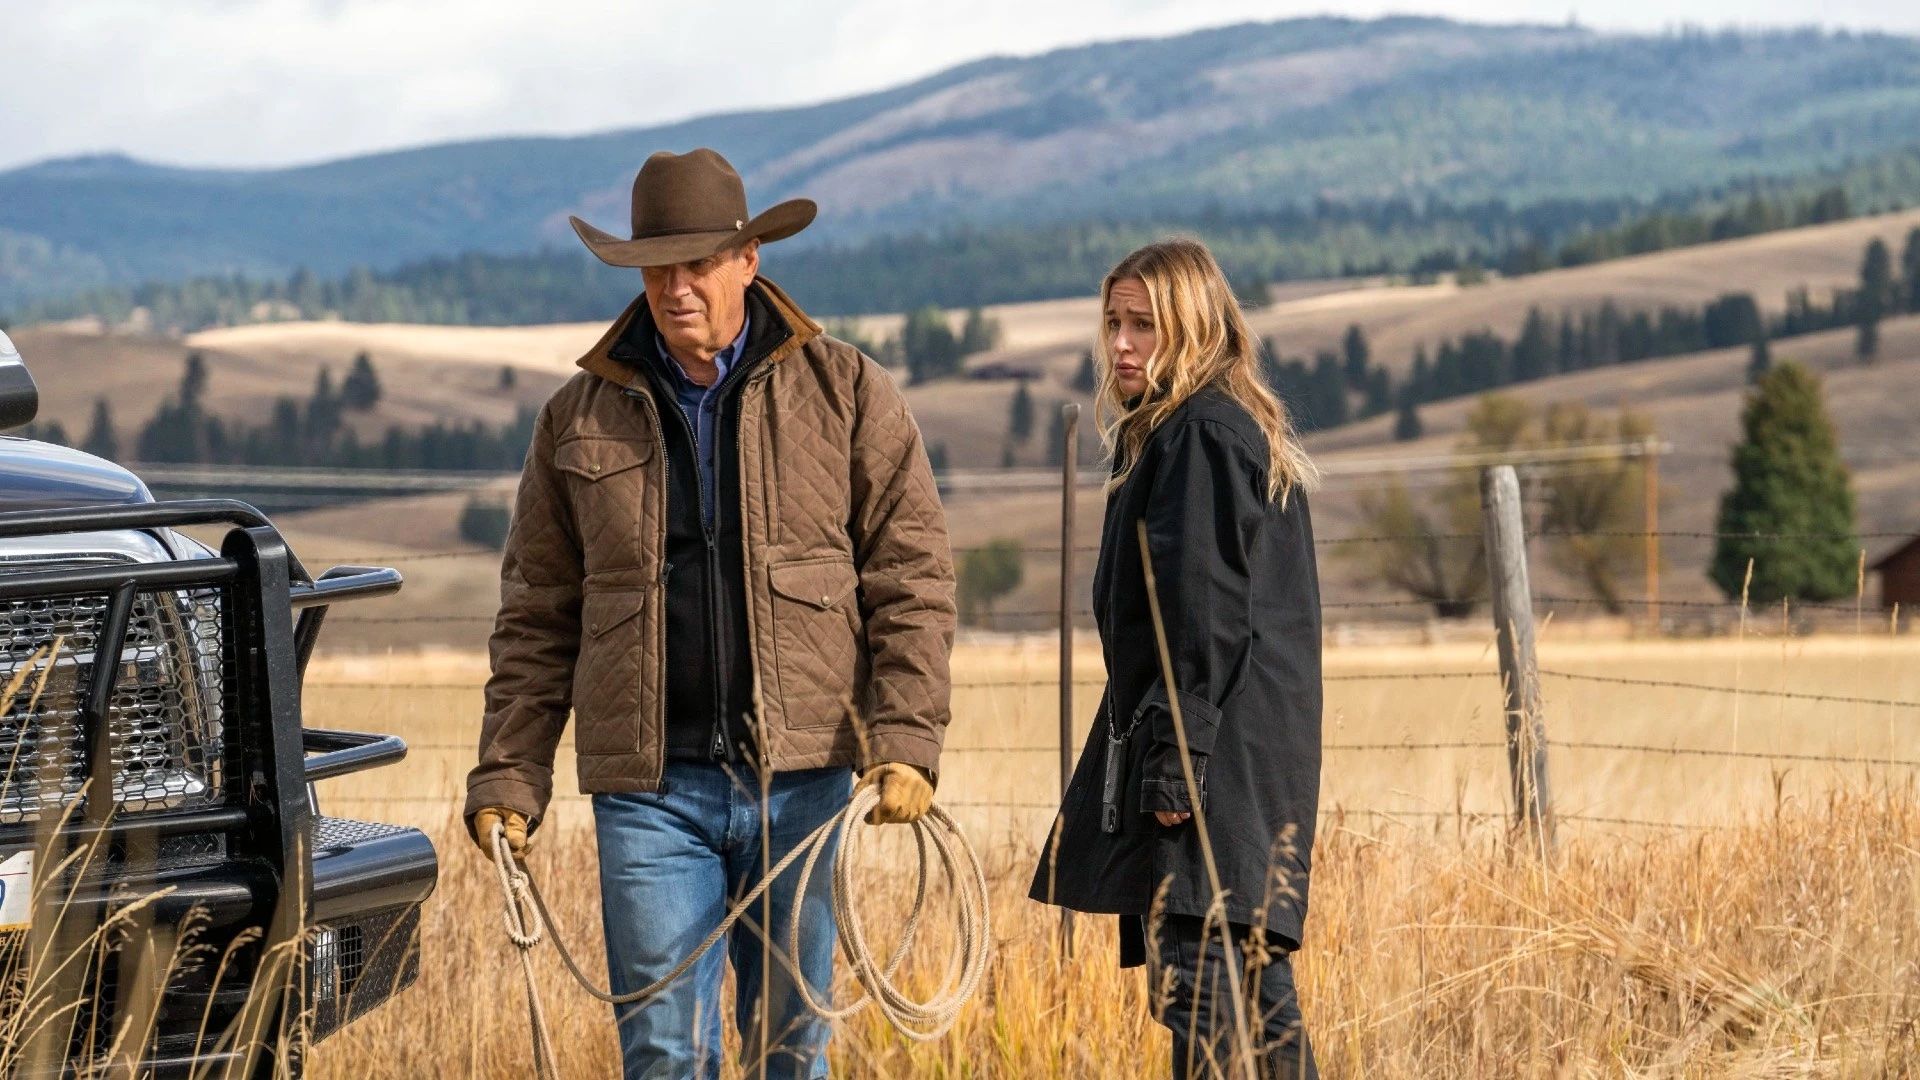 Exciting Developments in 'Yellowstone' Series Inside the Final Season and Future Spinoffs